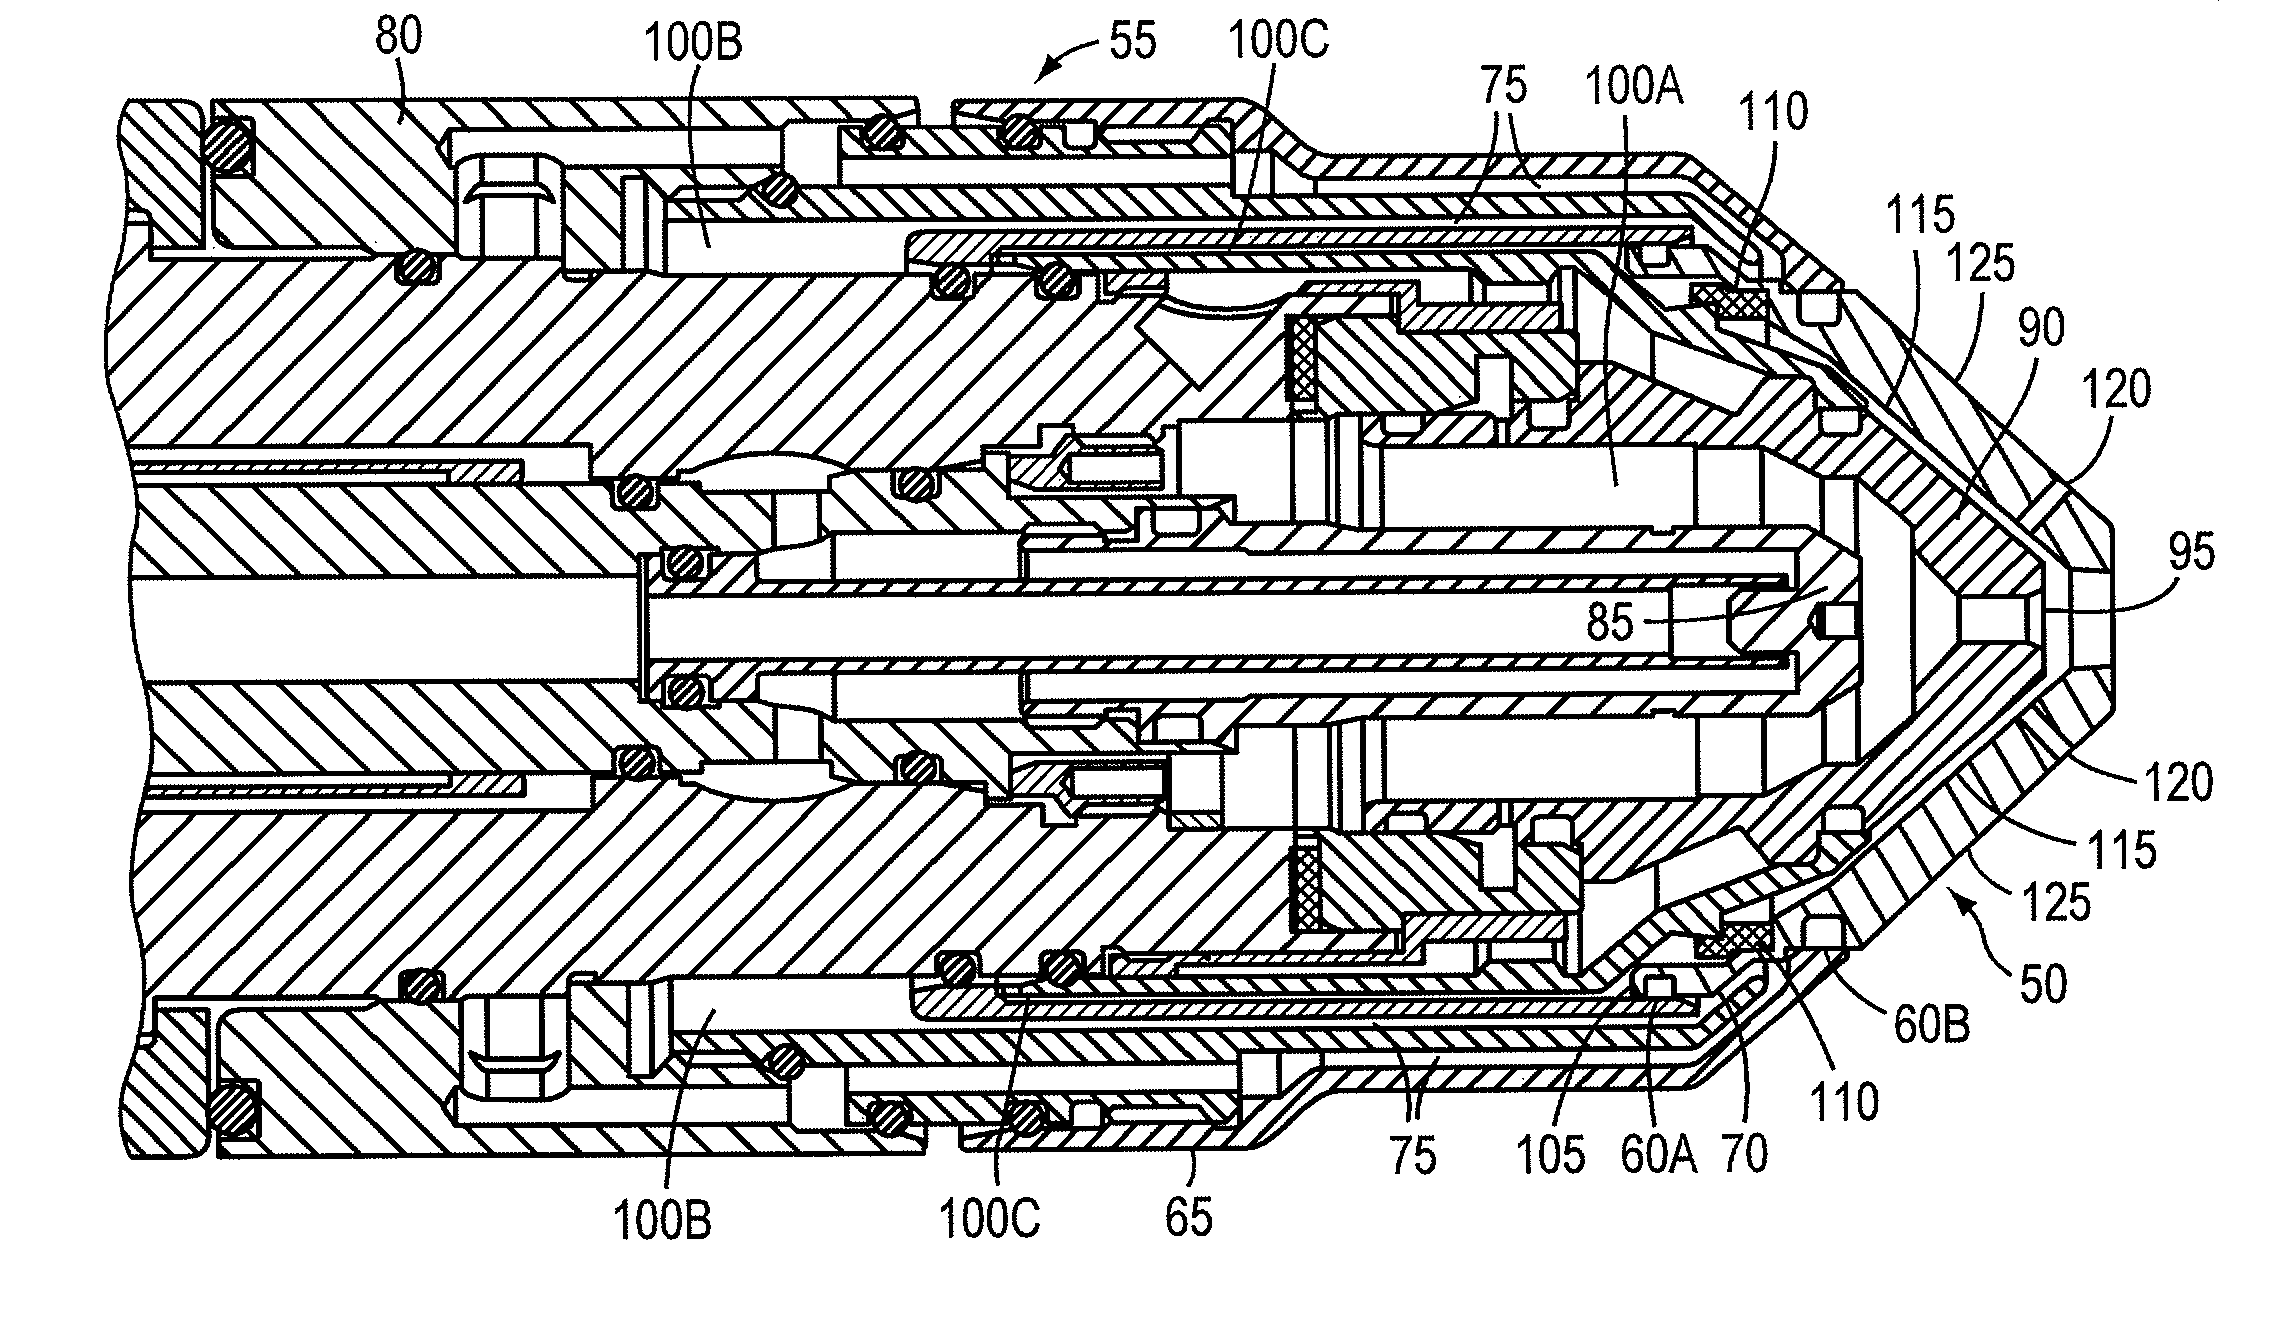 Apparatus and method for a liquid cooled shield for improved piercing performance